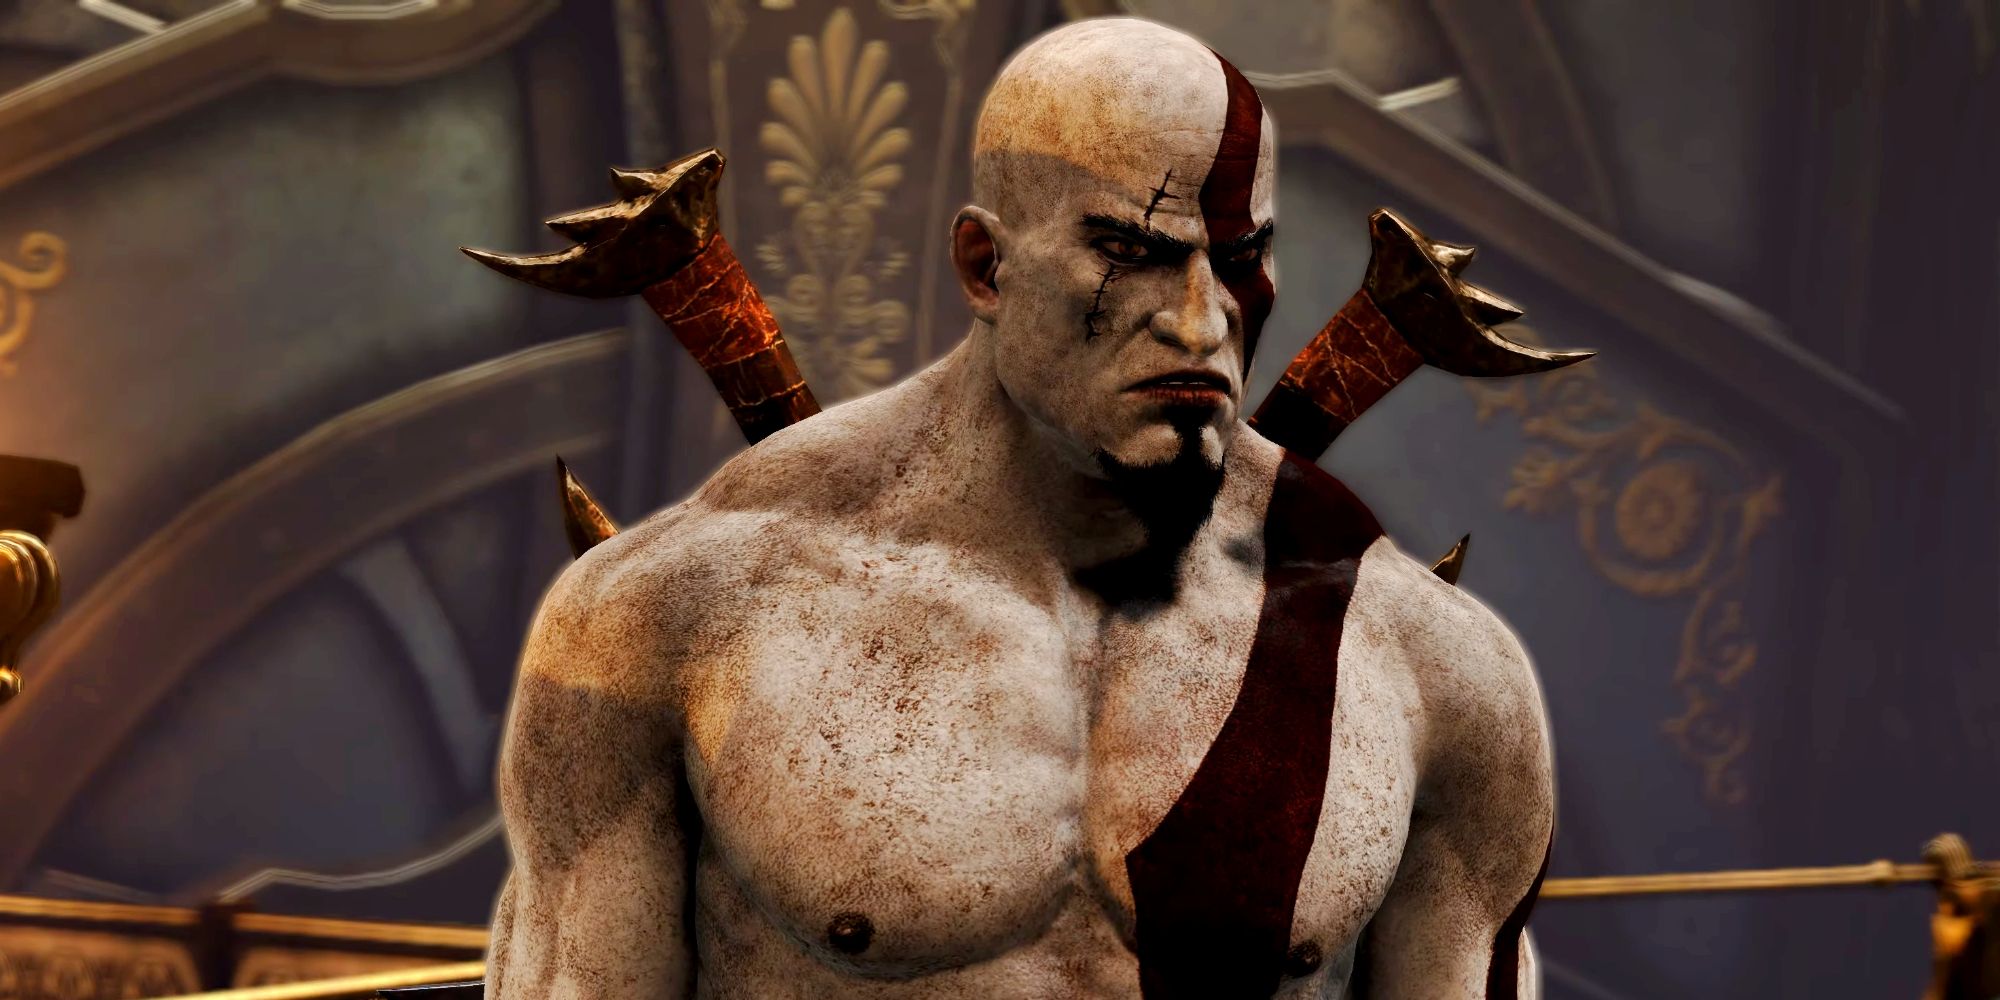 God Of War tried multiplayer too early